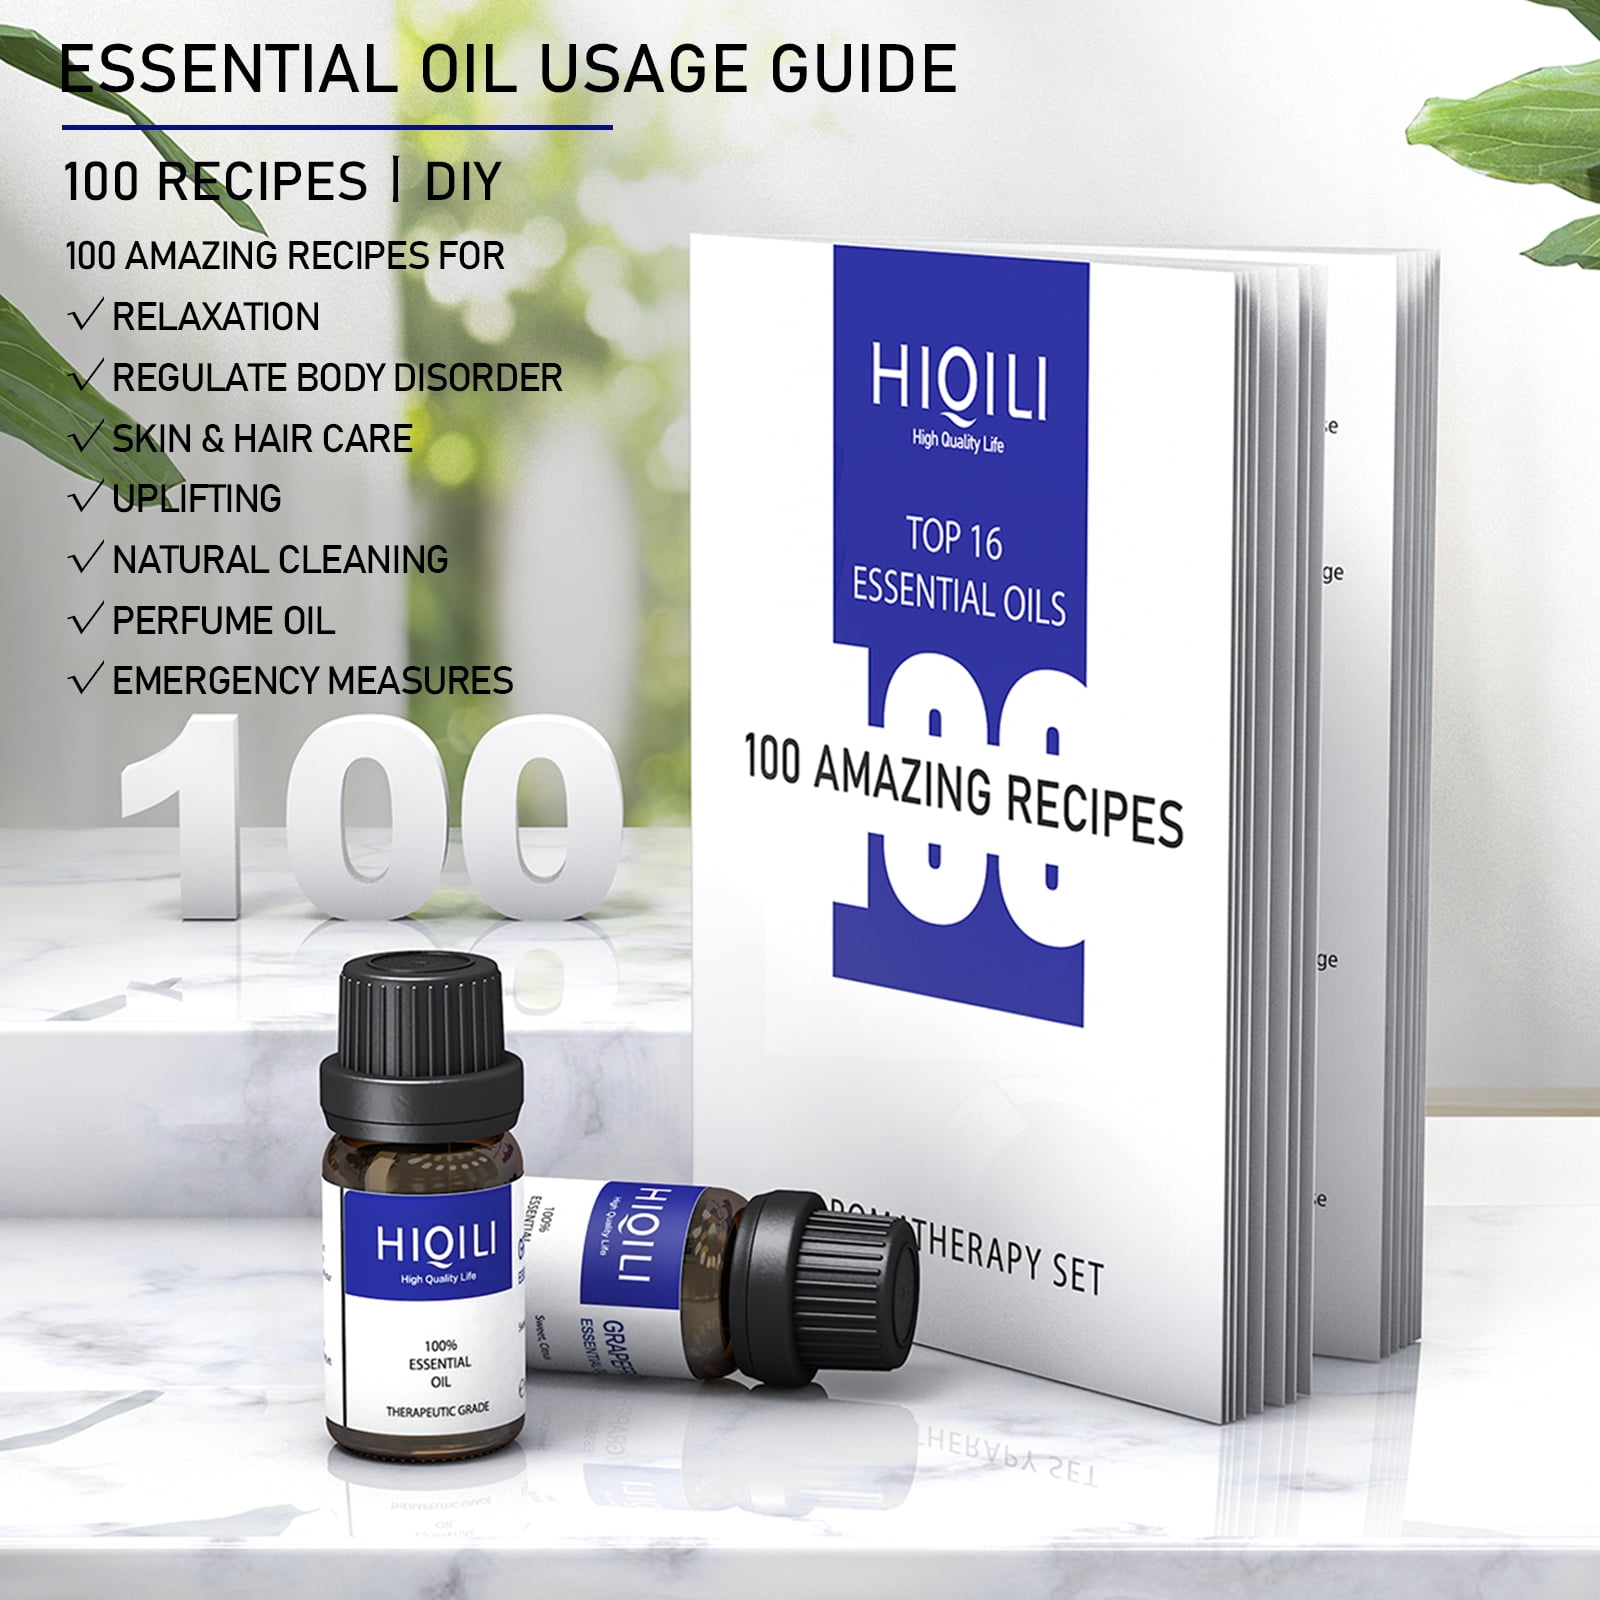 HIQILI Baby Powder Essential Oil - Refreshing Fragrance Oil for Diffuser,  Candle Soap Perfume Lotion Making, Mild Home Scent, 3.38 Fl Oz Halloween